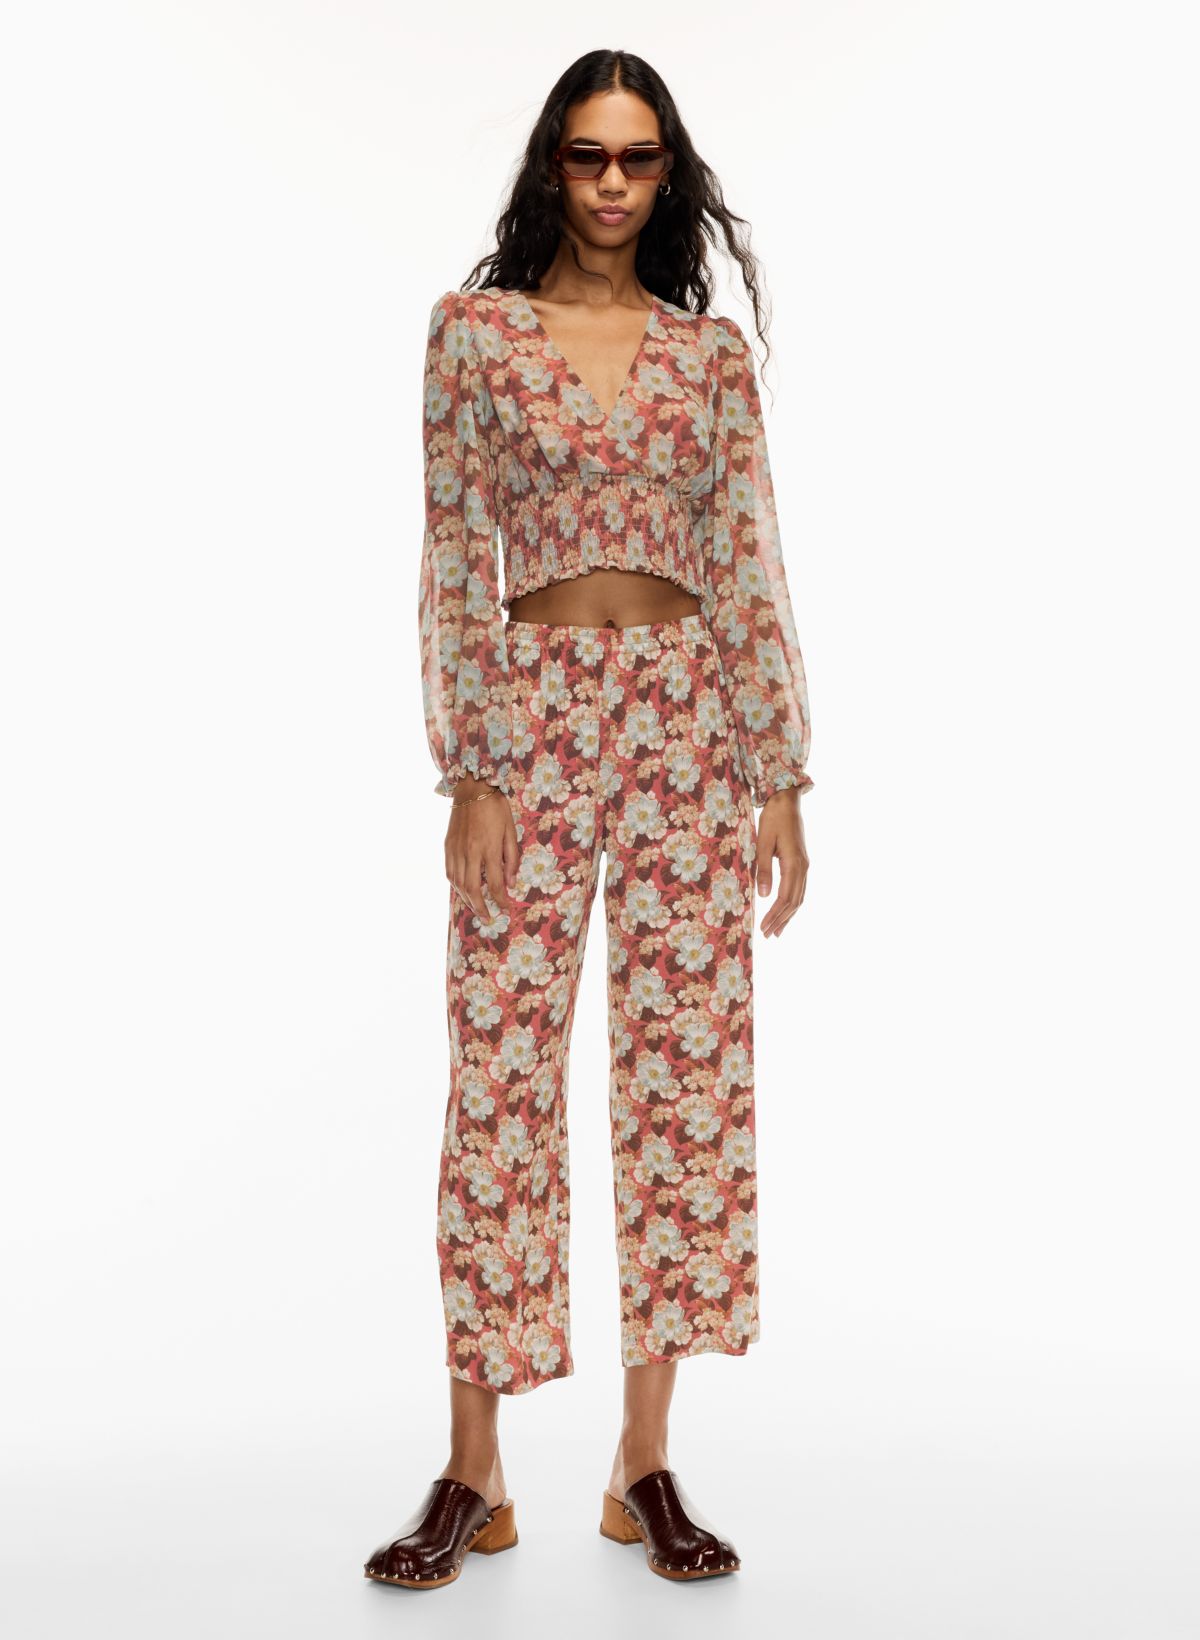 Mid-Rise Patterned Micro Performance Fleece Pajama Pants for Women